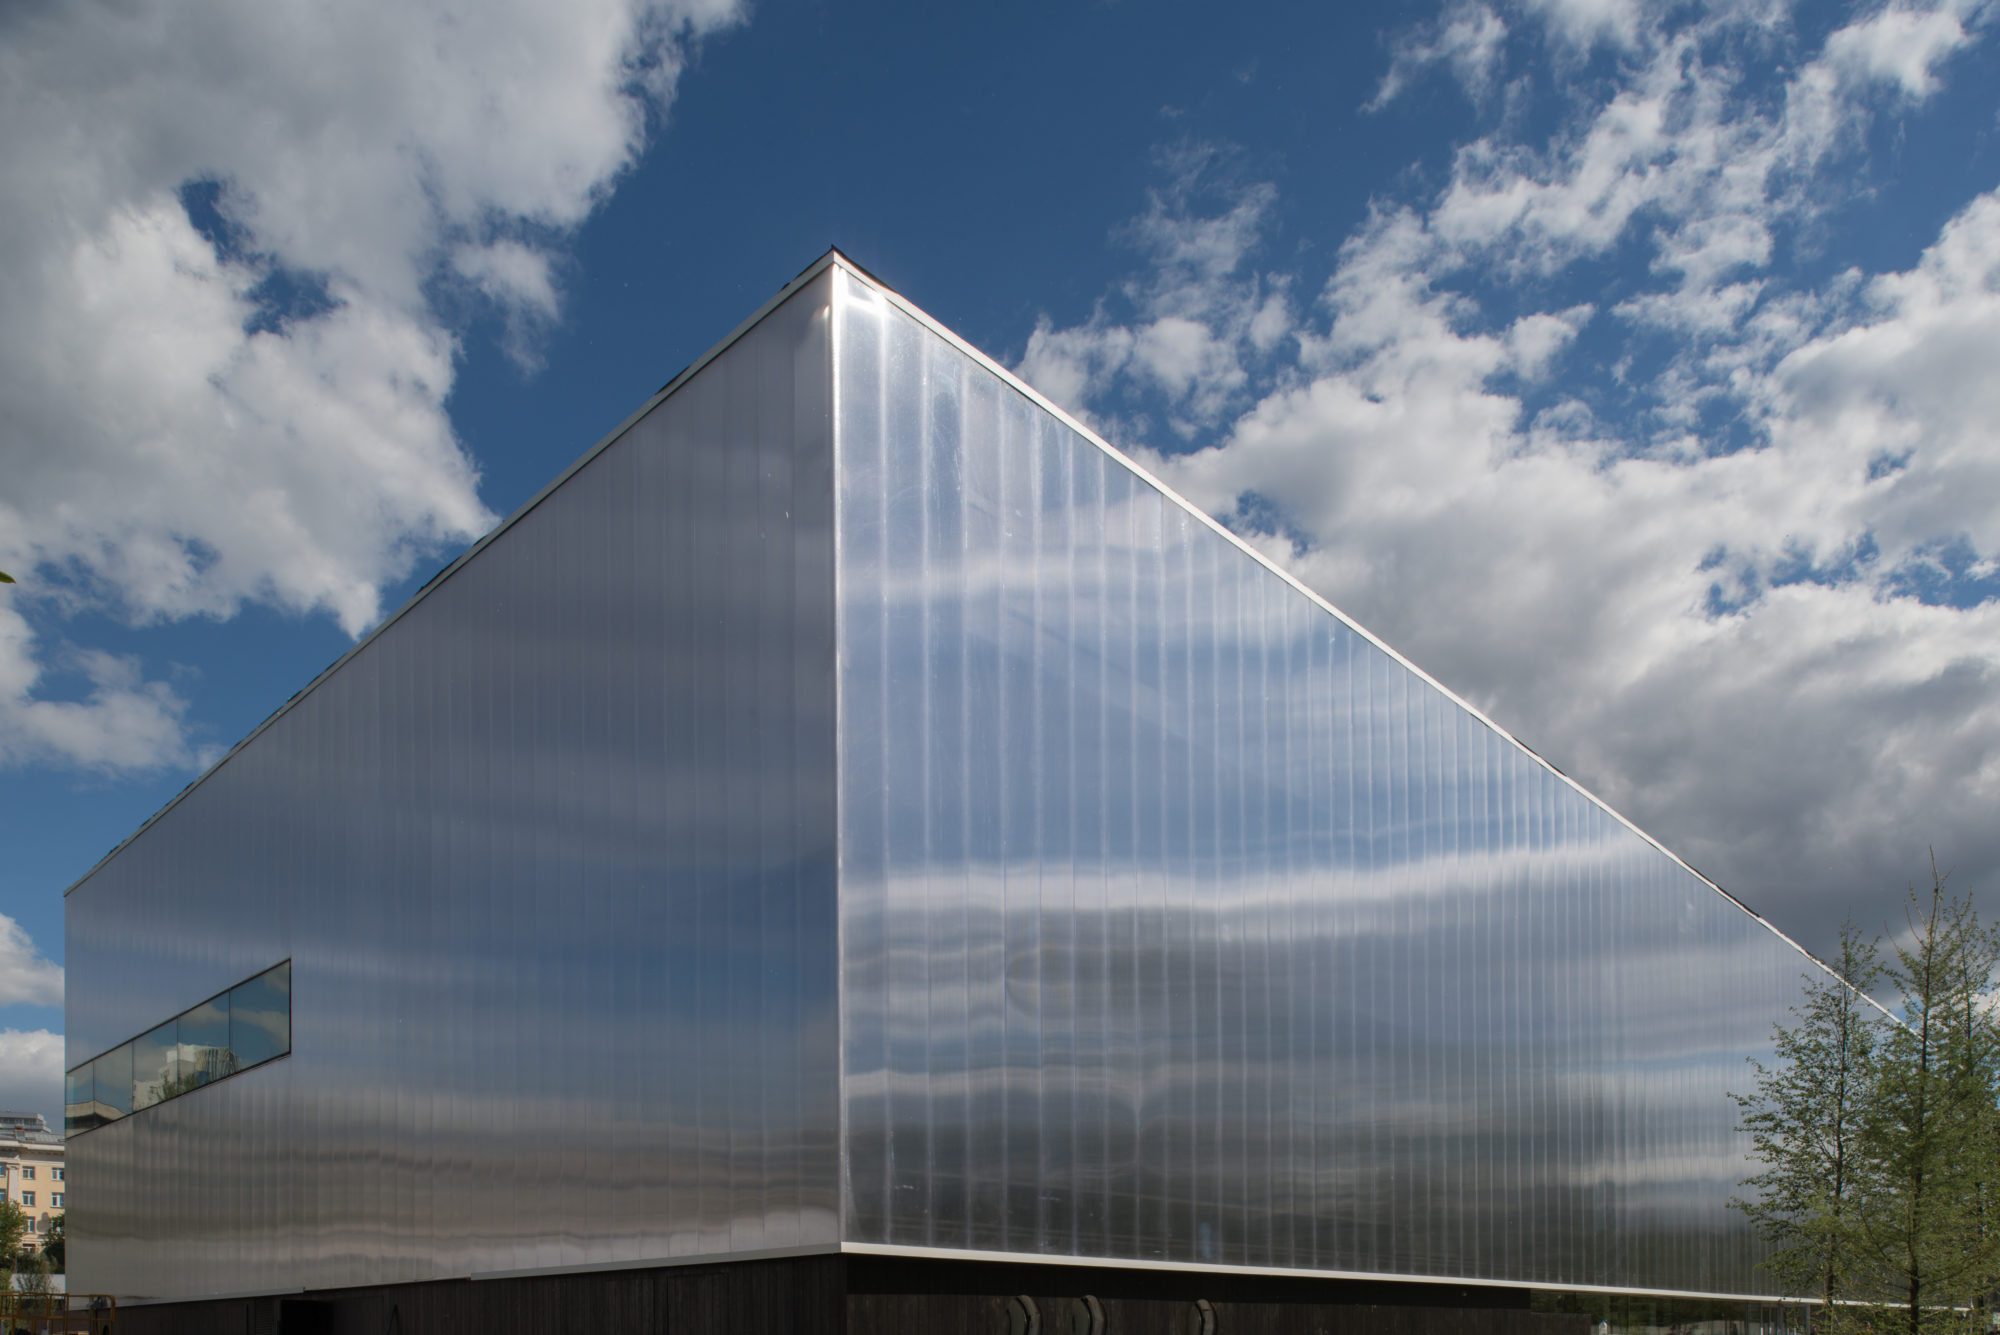 A perspective view of a rectangular building that reflects and distorts the sky